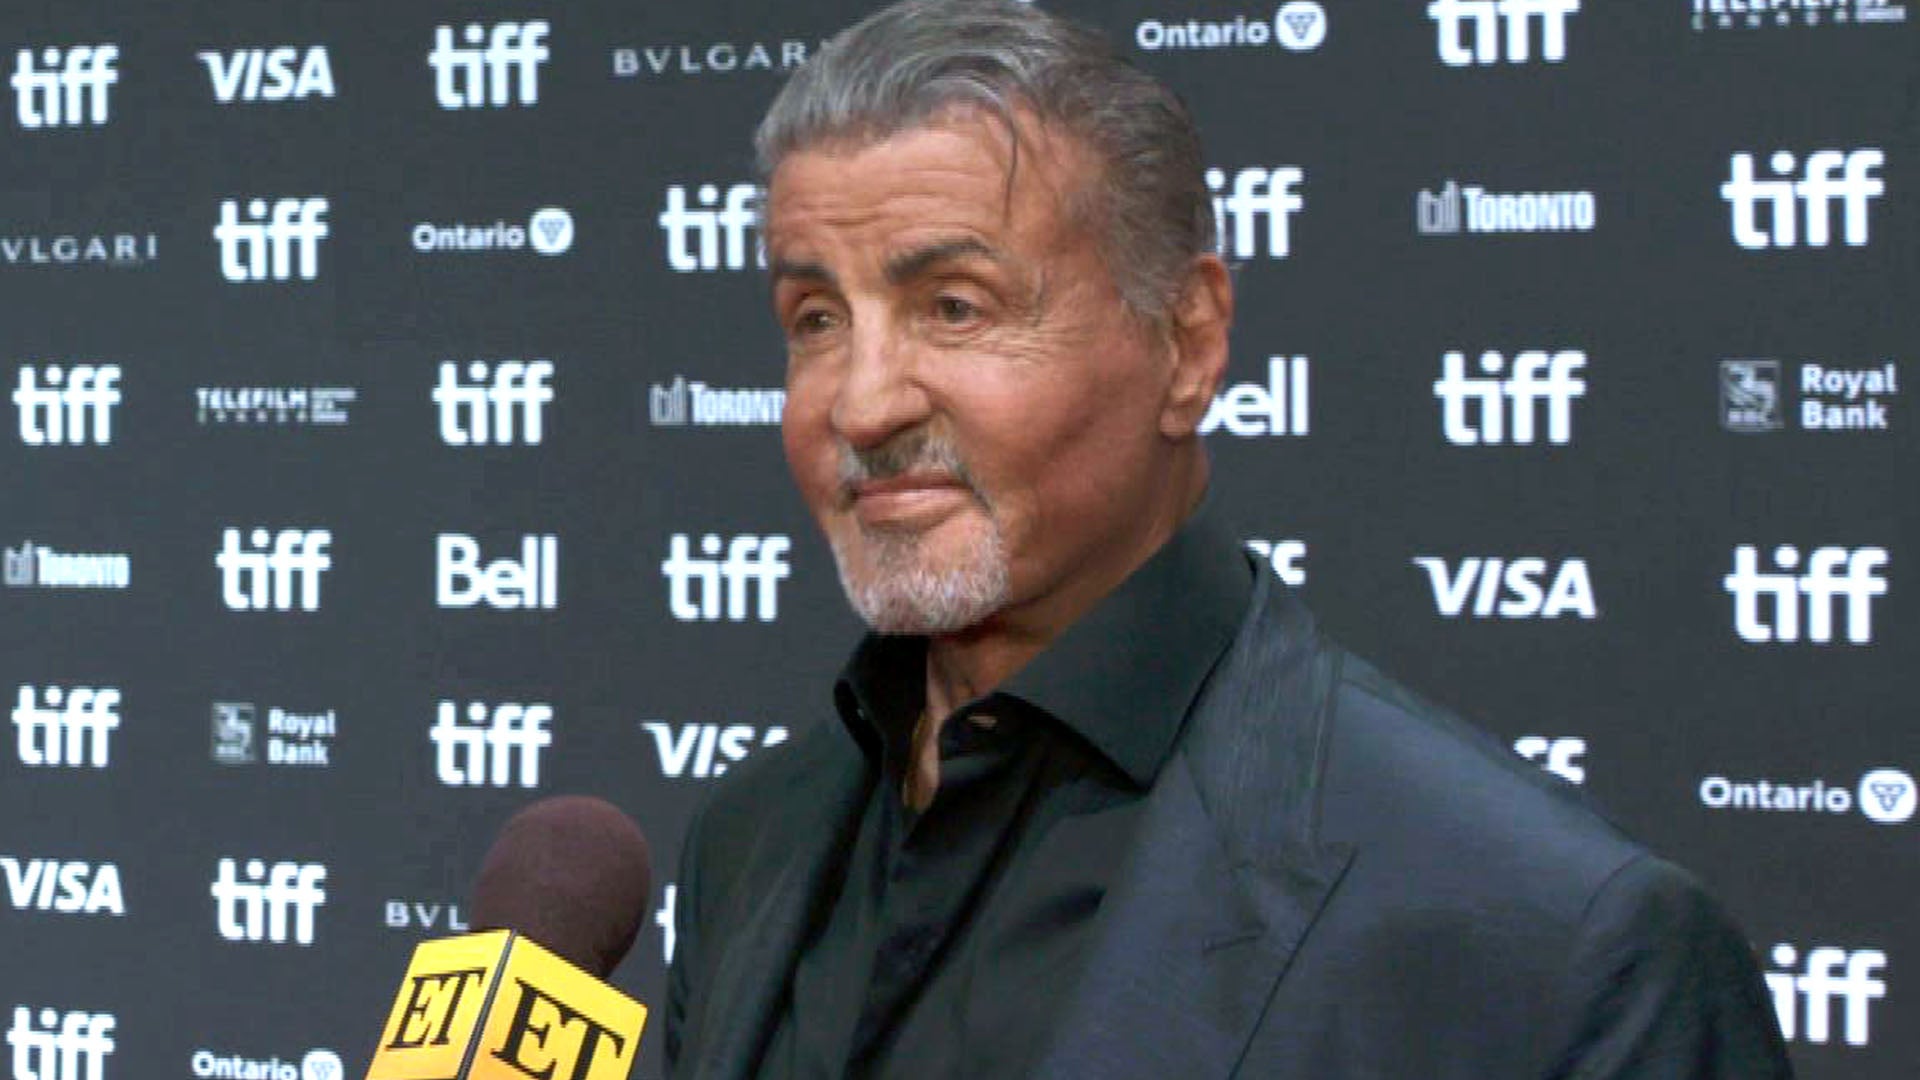 Sylvester Stallone on His Legacy and ‘Competitive’ Relationship With Arnold Schwarzenegger